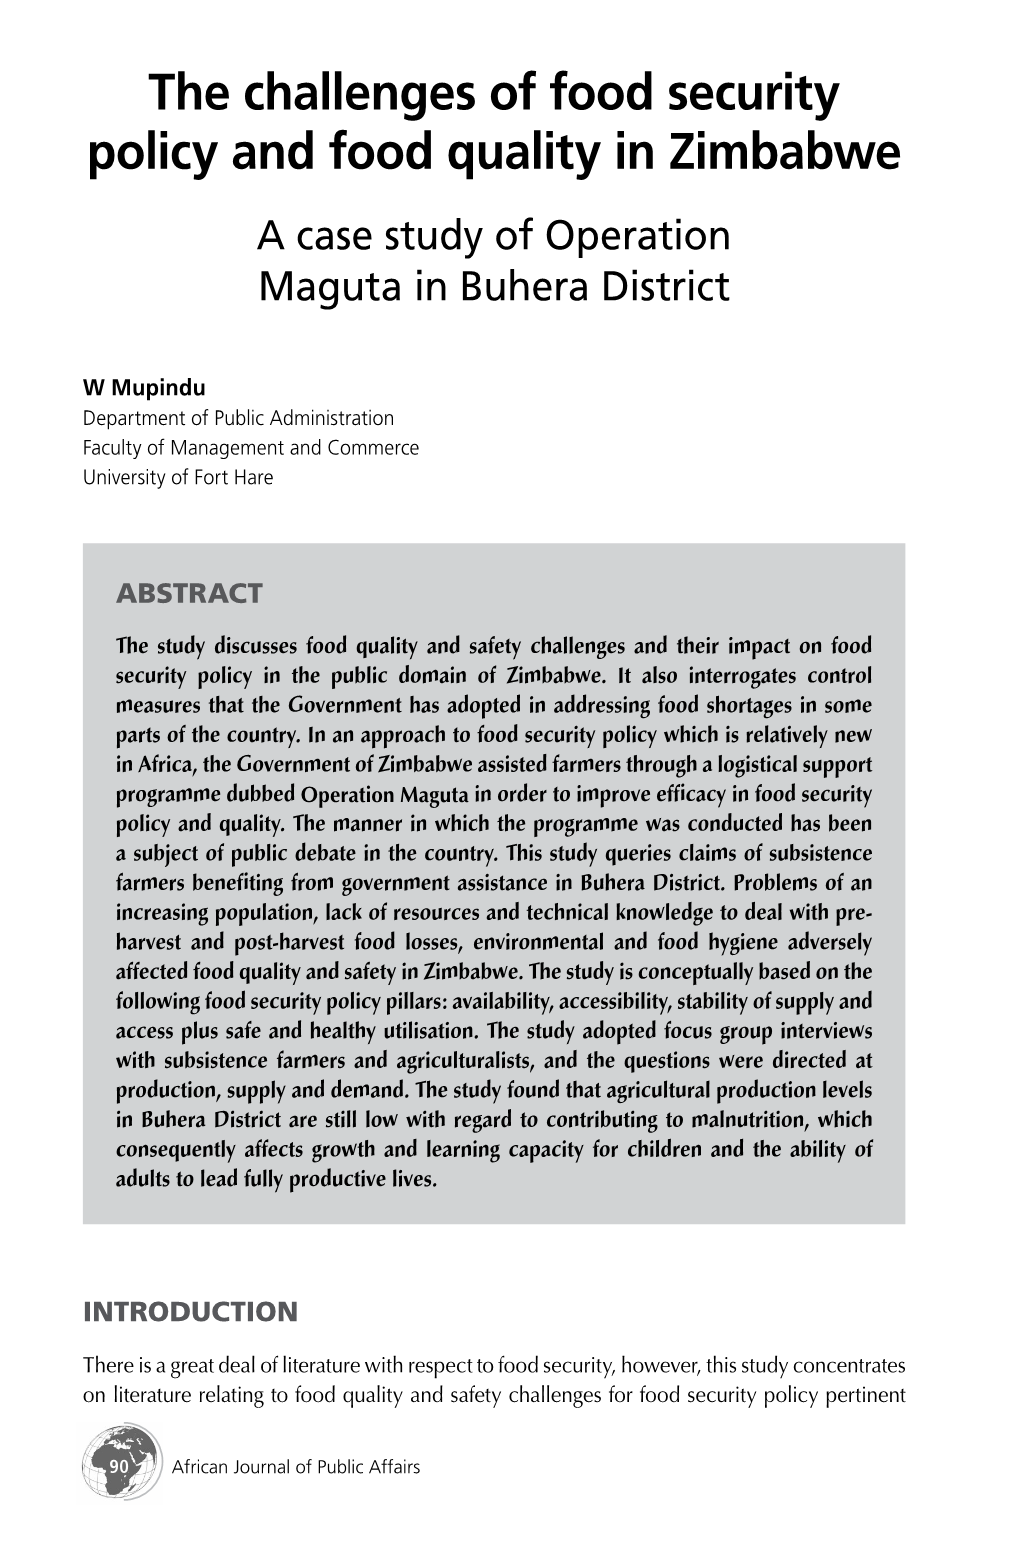 The Challenges of Food Security Policy and Food Quality in Zimbabwe a Case Study of Operation Maguta in Buhera District